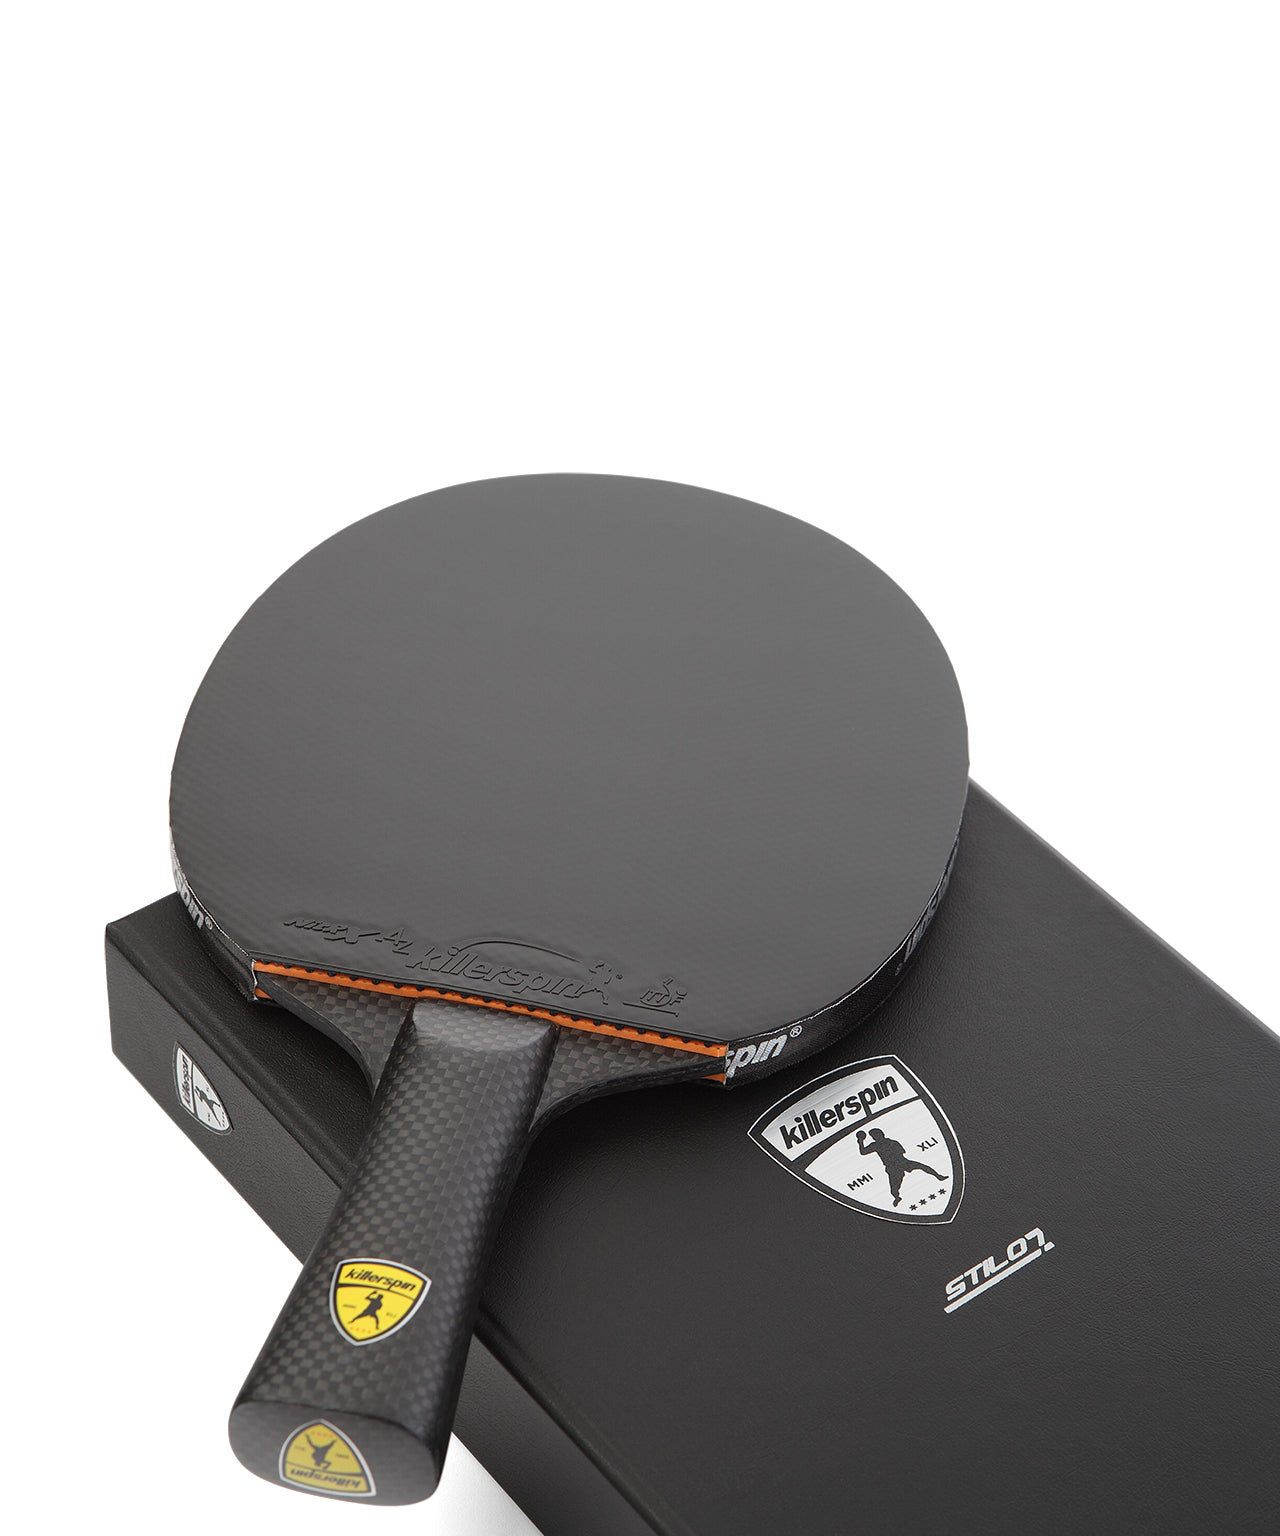 Stilo7 SVR Ping Pong Paddle-Limited Edition | Killerspin Table Tennis